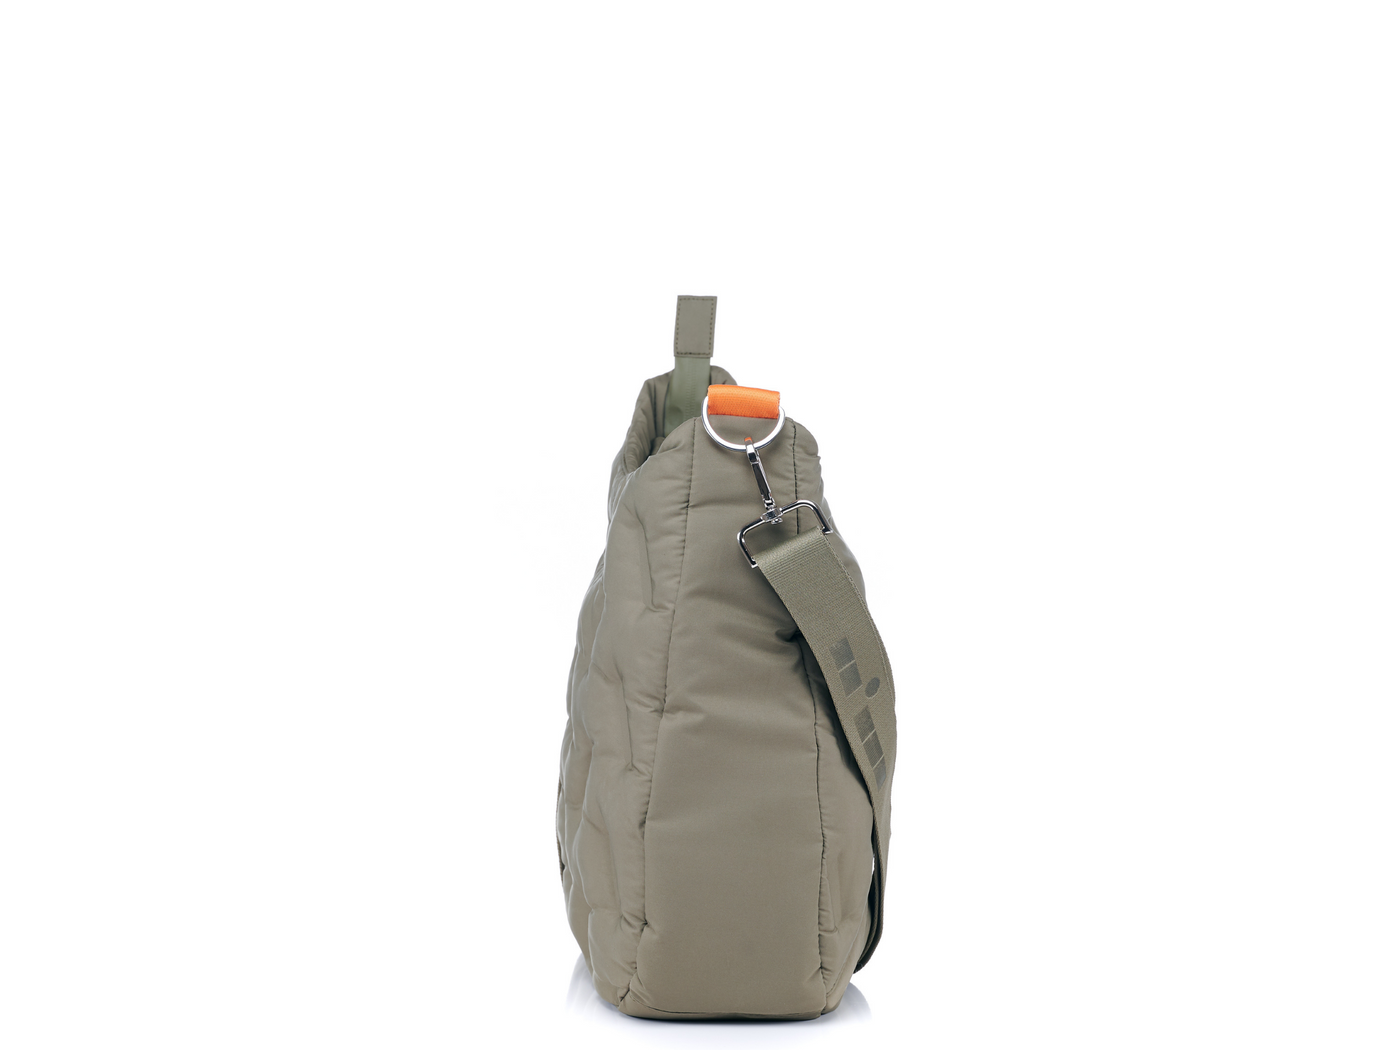 Go Dash Dot Arly Messenger Tote side view #olive